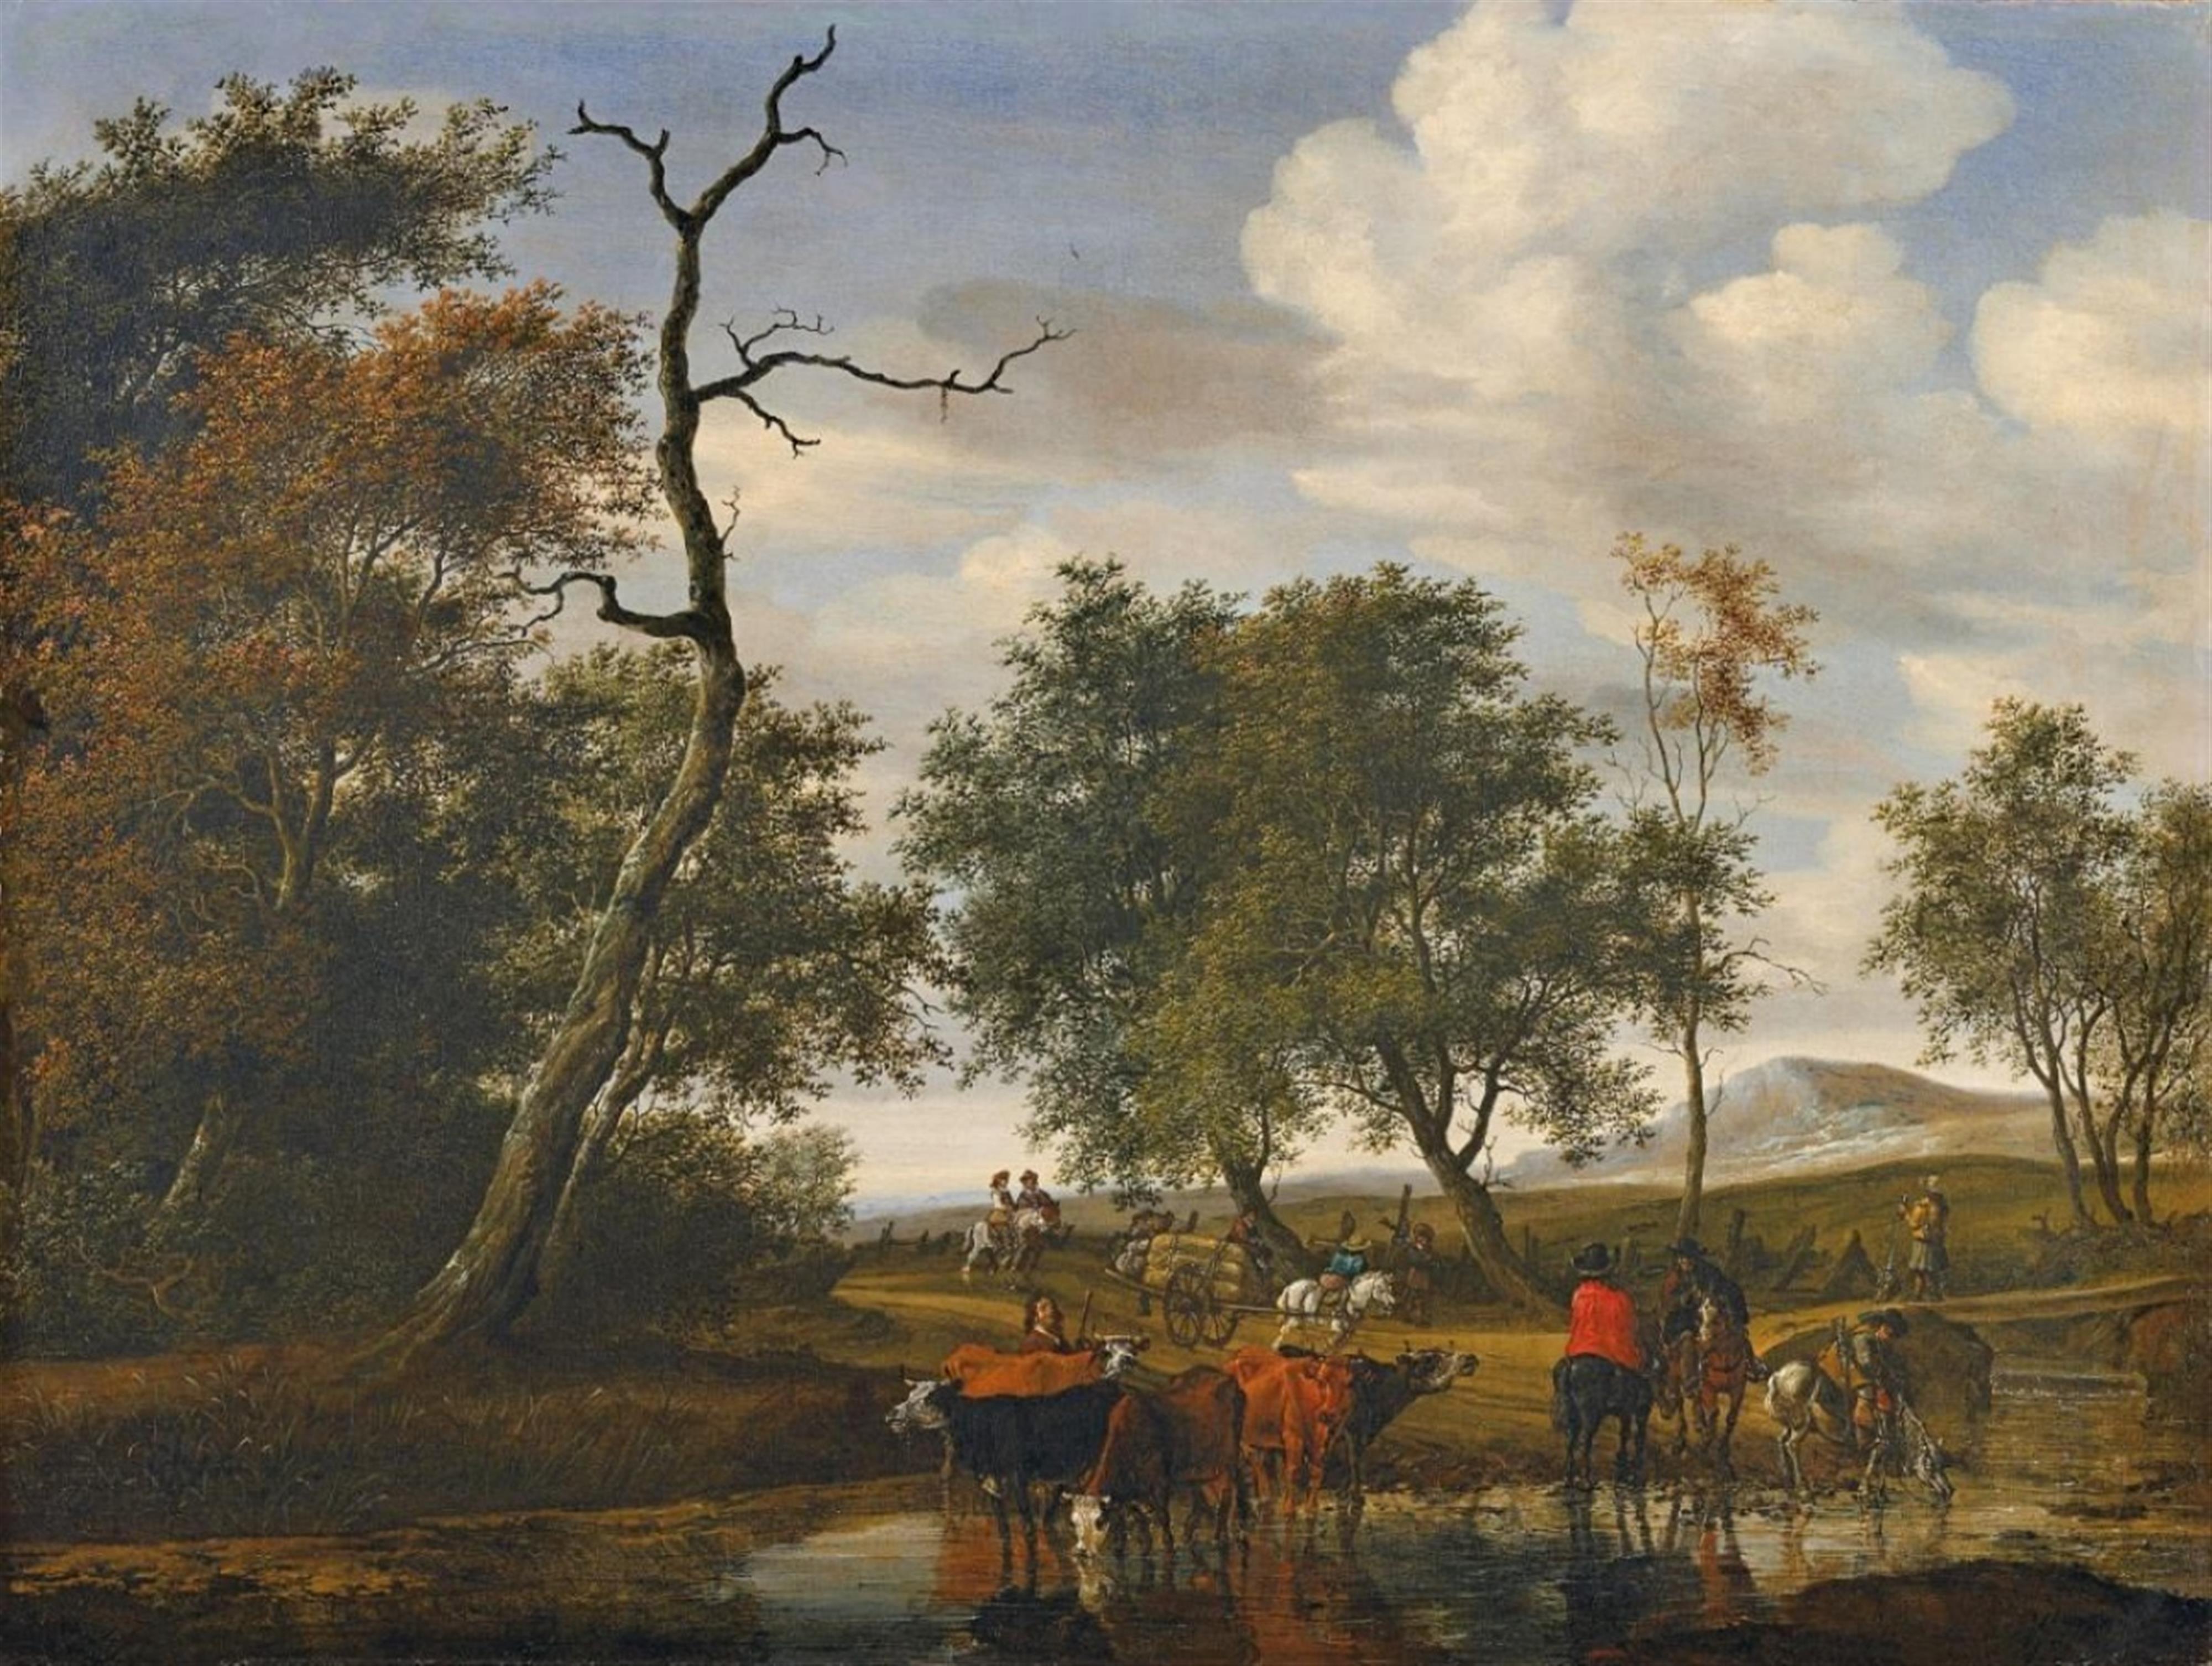 Salomon van Ruysdael - Cattle by a Pond (The Robbery) - image-1